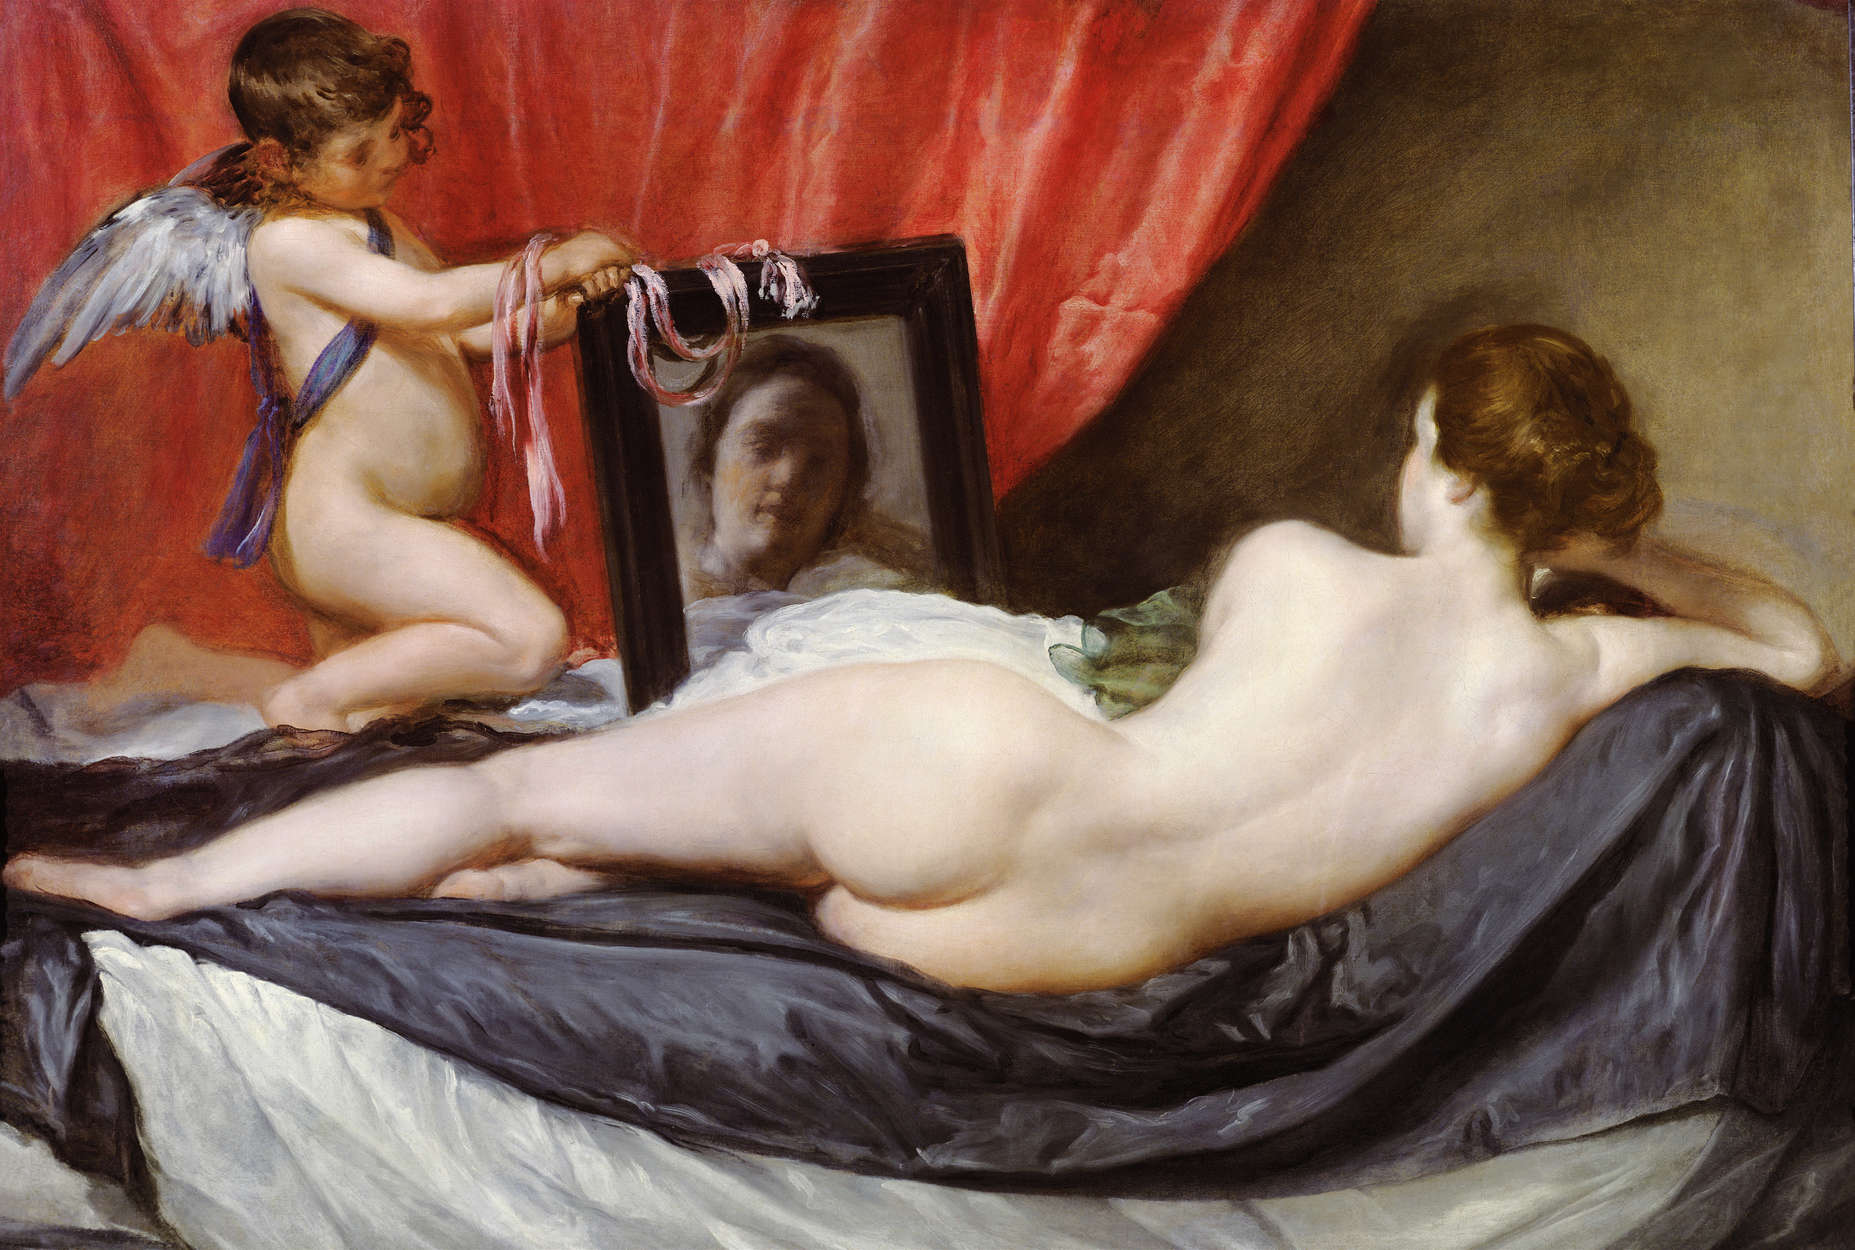             Photo wallpaper "Venus in front of the mirror" by Diego Velazquez
        